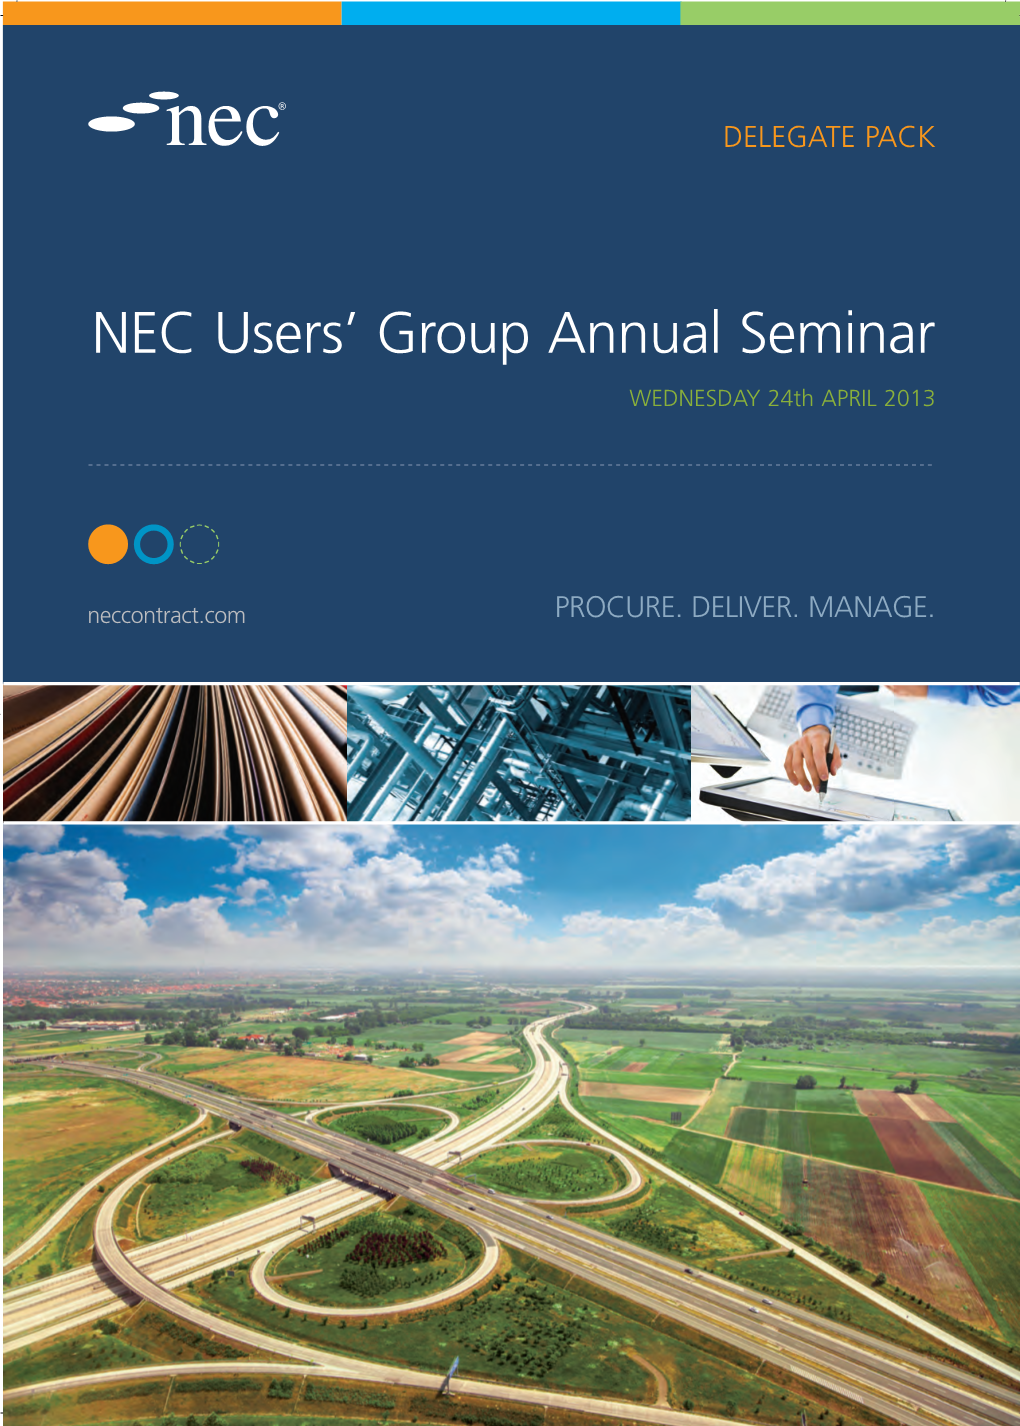 NEC Users' Group Annual Seminar 24 April 2013 | One Great George Street